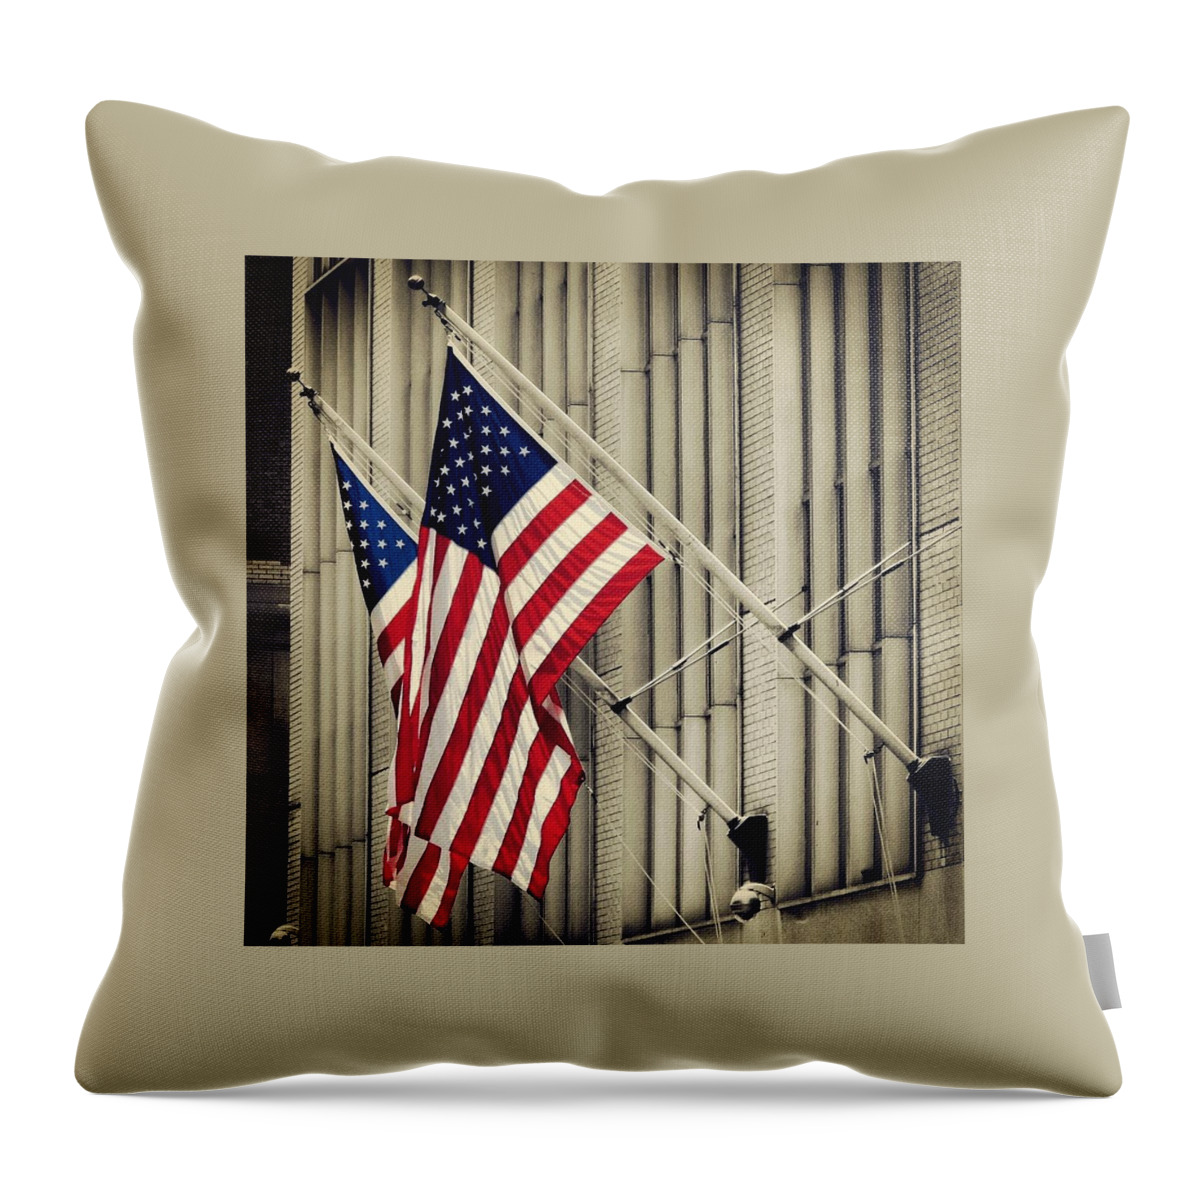 Usa Throw Pillow featuring the photograph American Flags by Goncalo Carreira